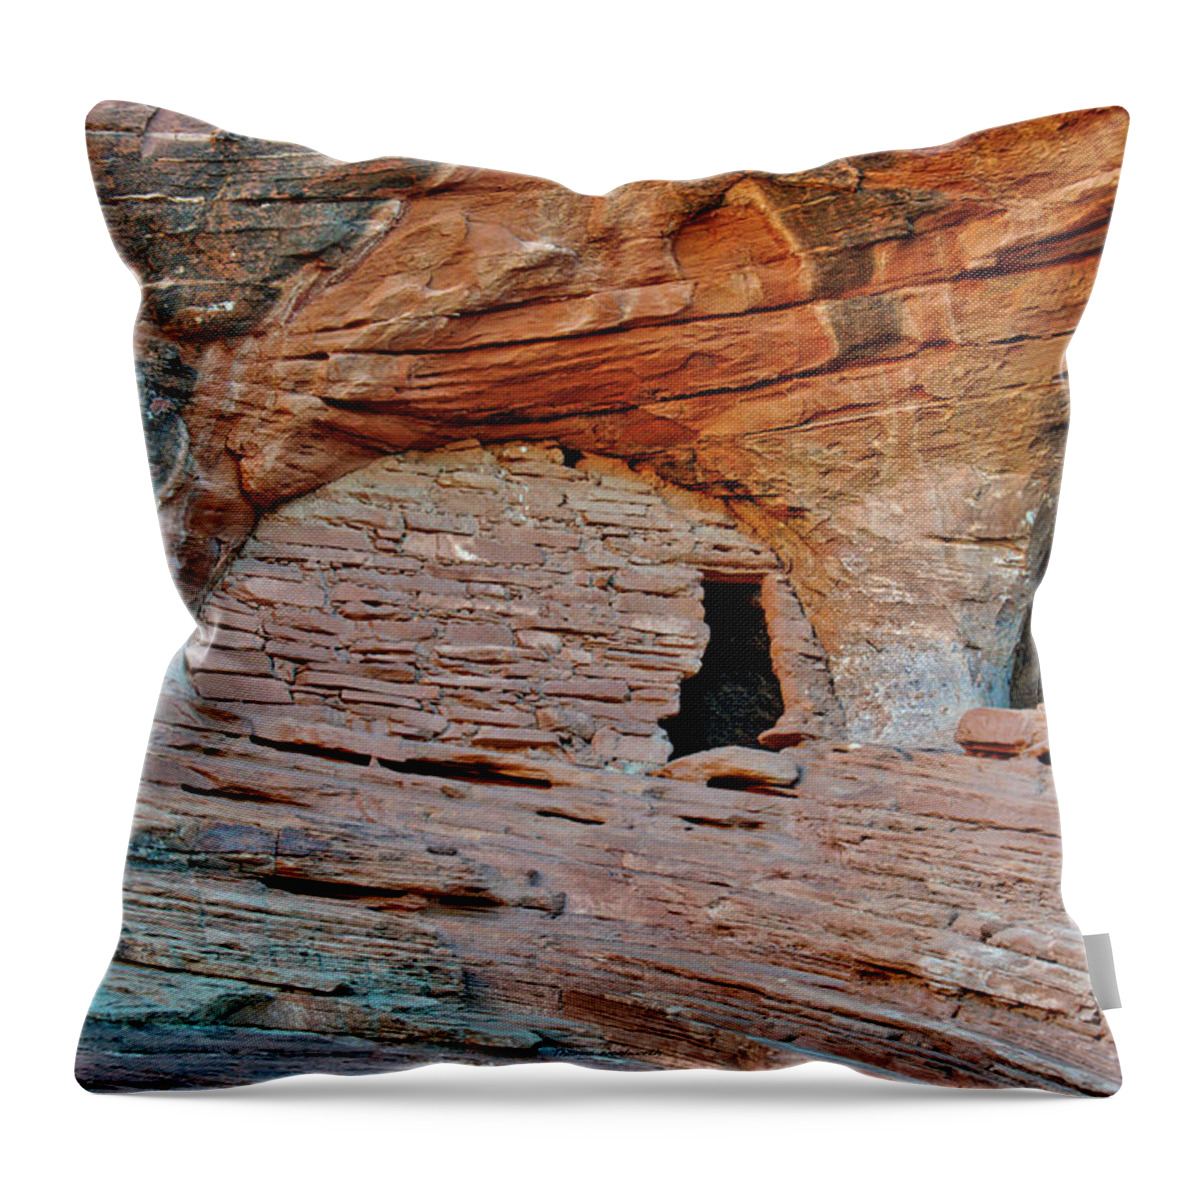 Mystery Valley Throw Pillow featuring the photograph Ancient Ruins Mystery Valley Colorado Plateau Arizona 05 by Thomas Woolworth